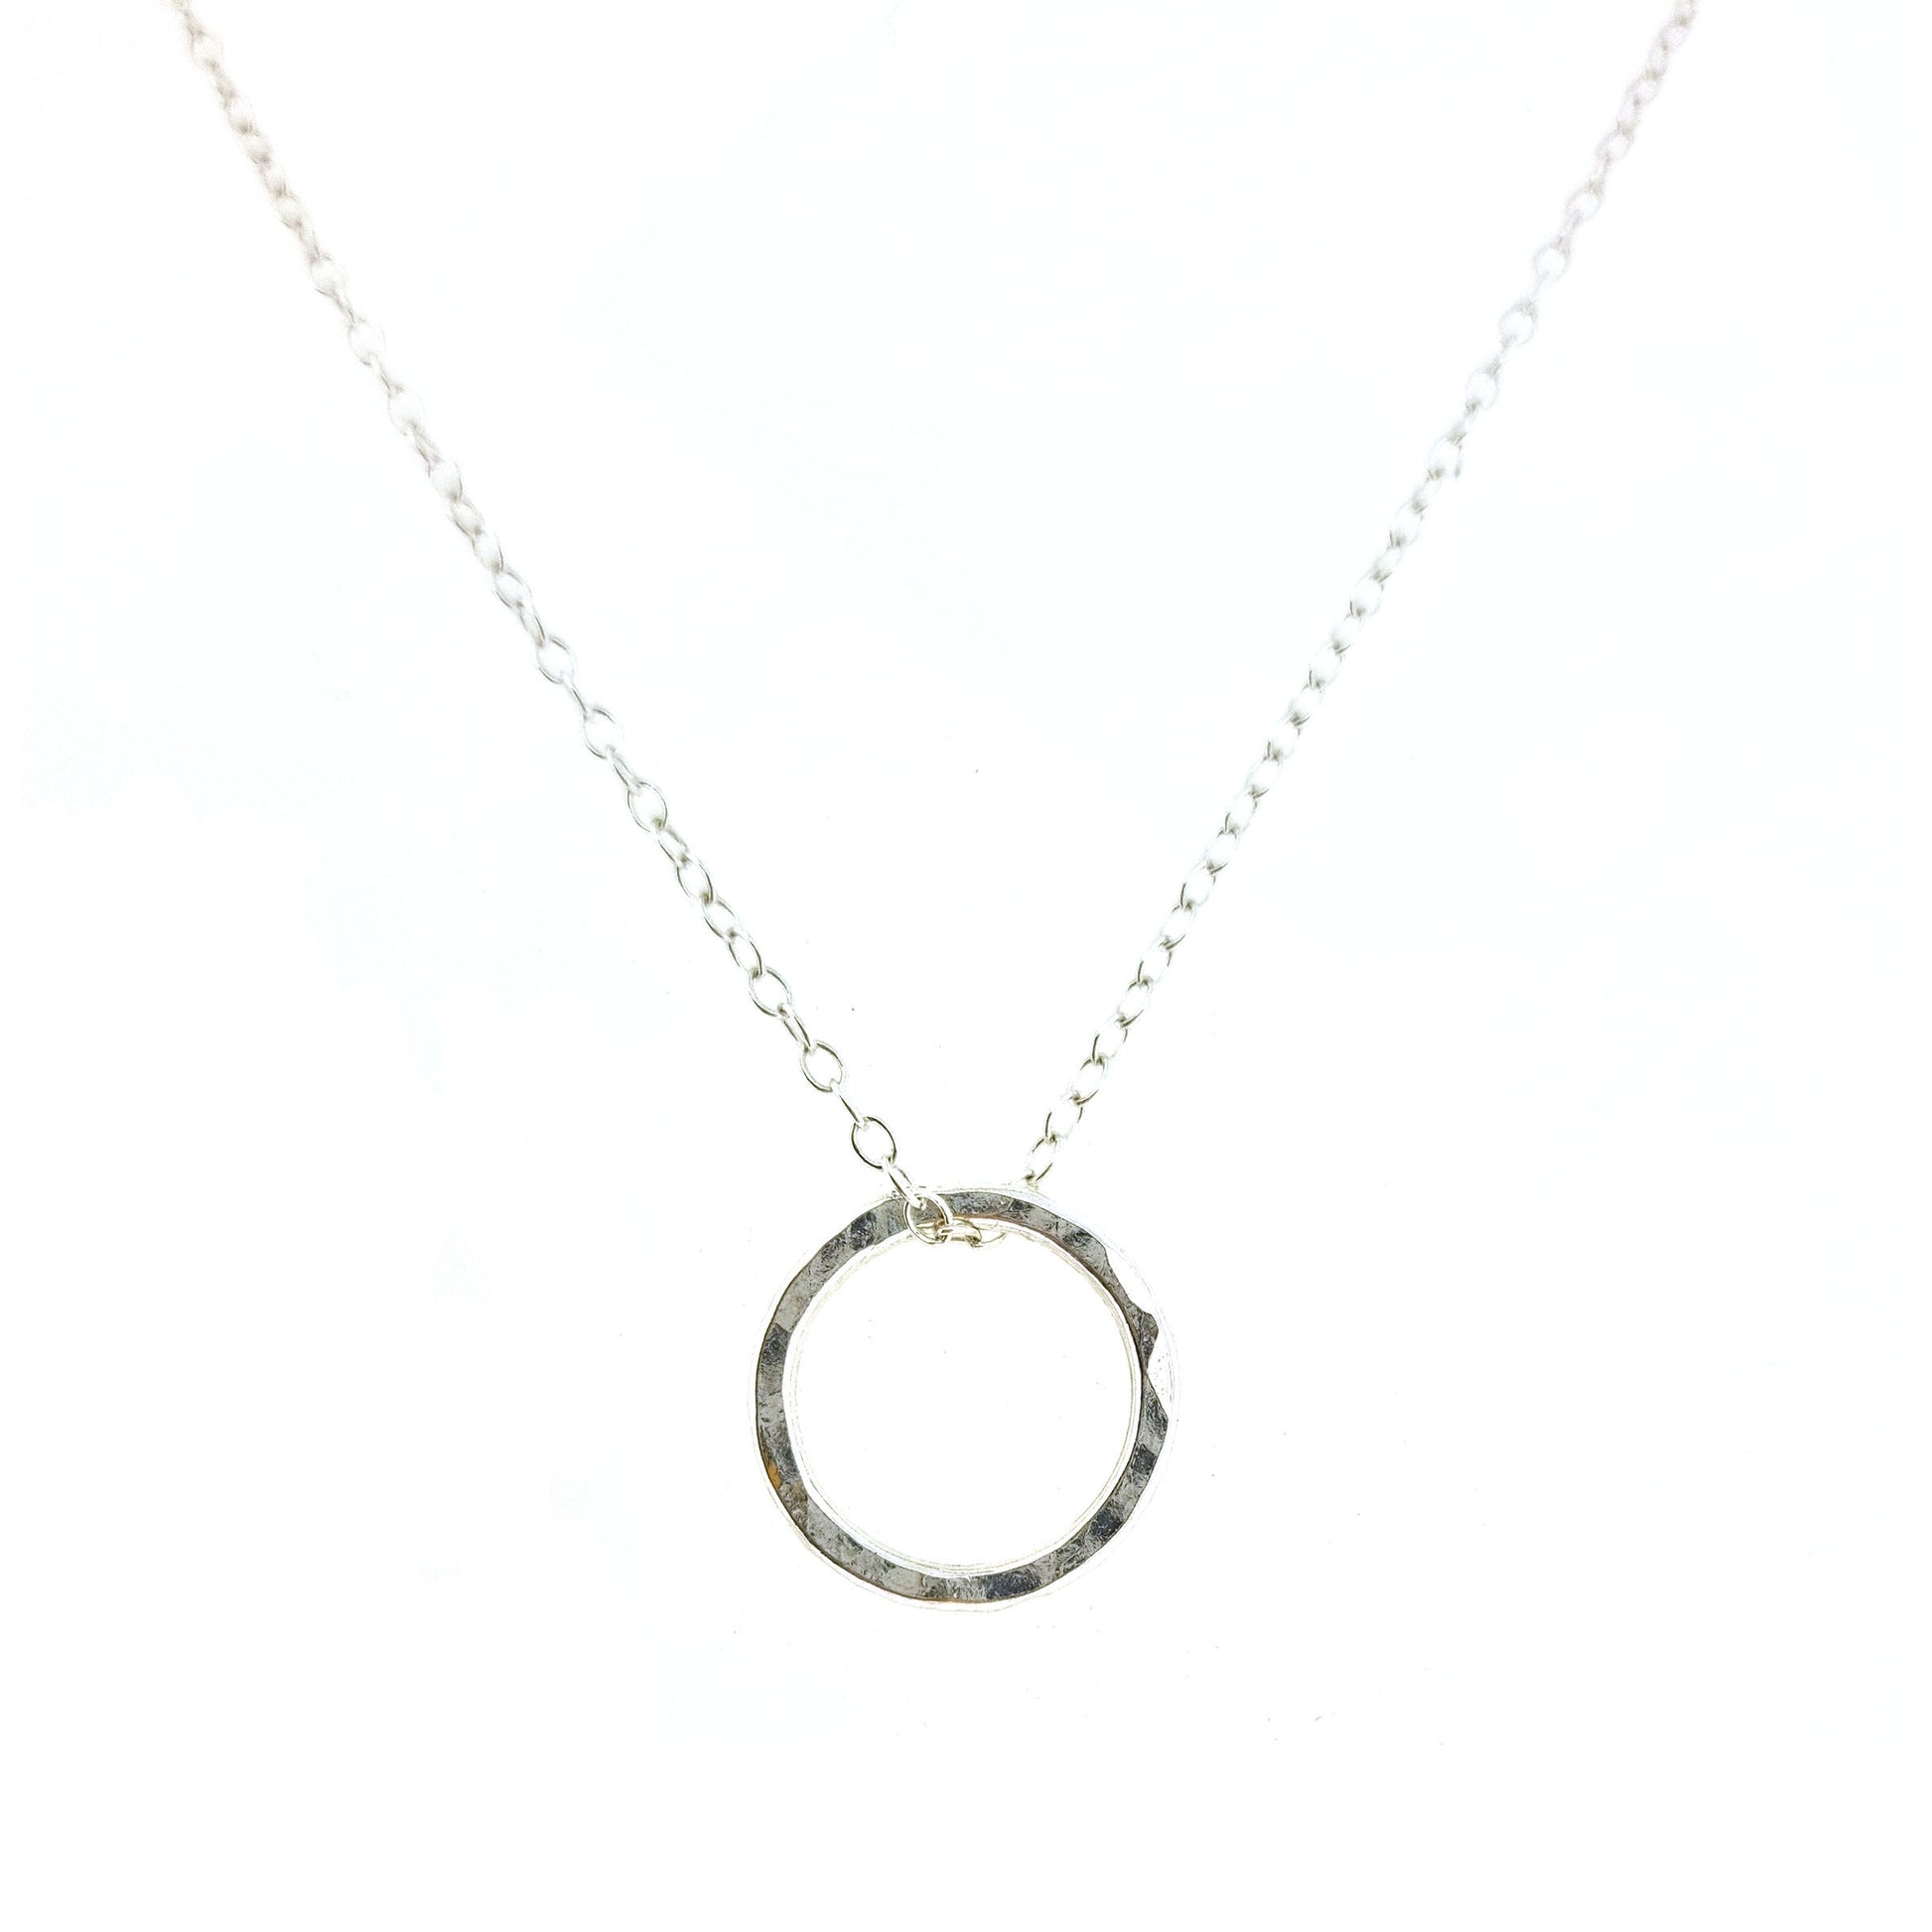 Silver hammered open circle pendant on silver chain - small